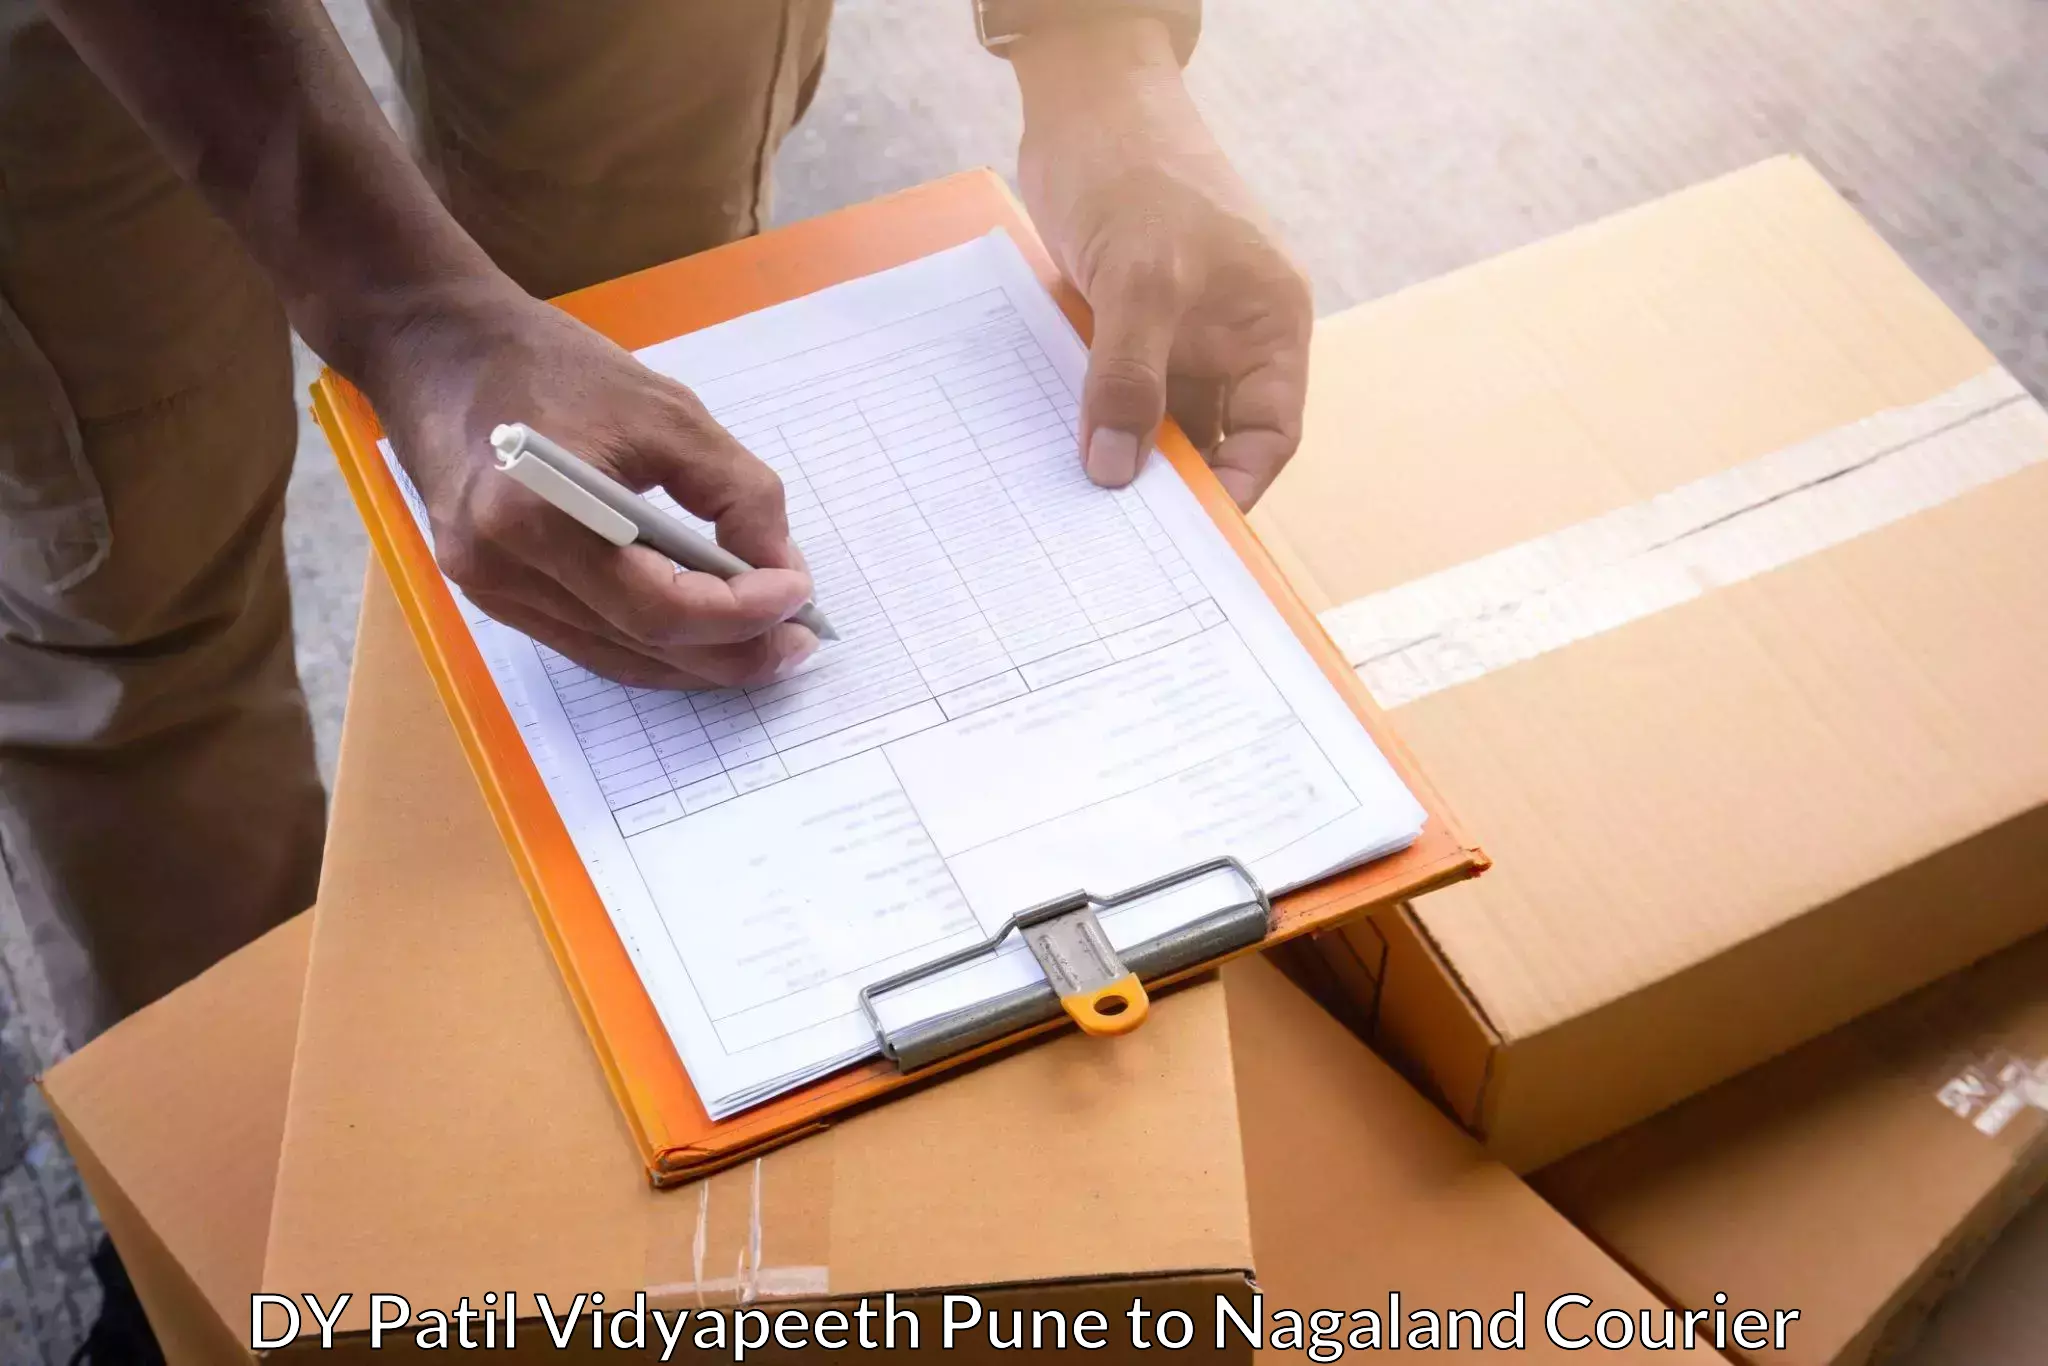 Next-day delivery options in DY Patil Vidyapeeth Pune to Dimapur